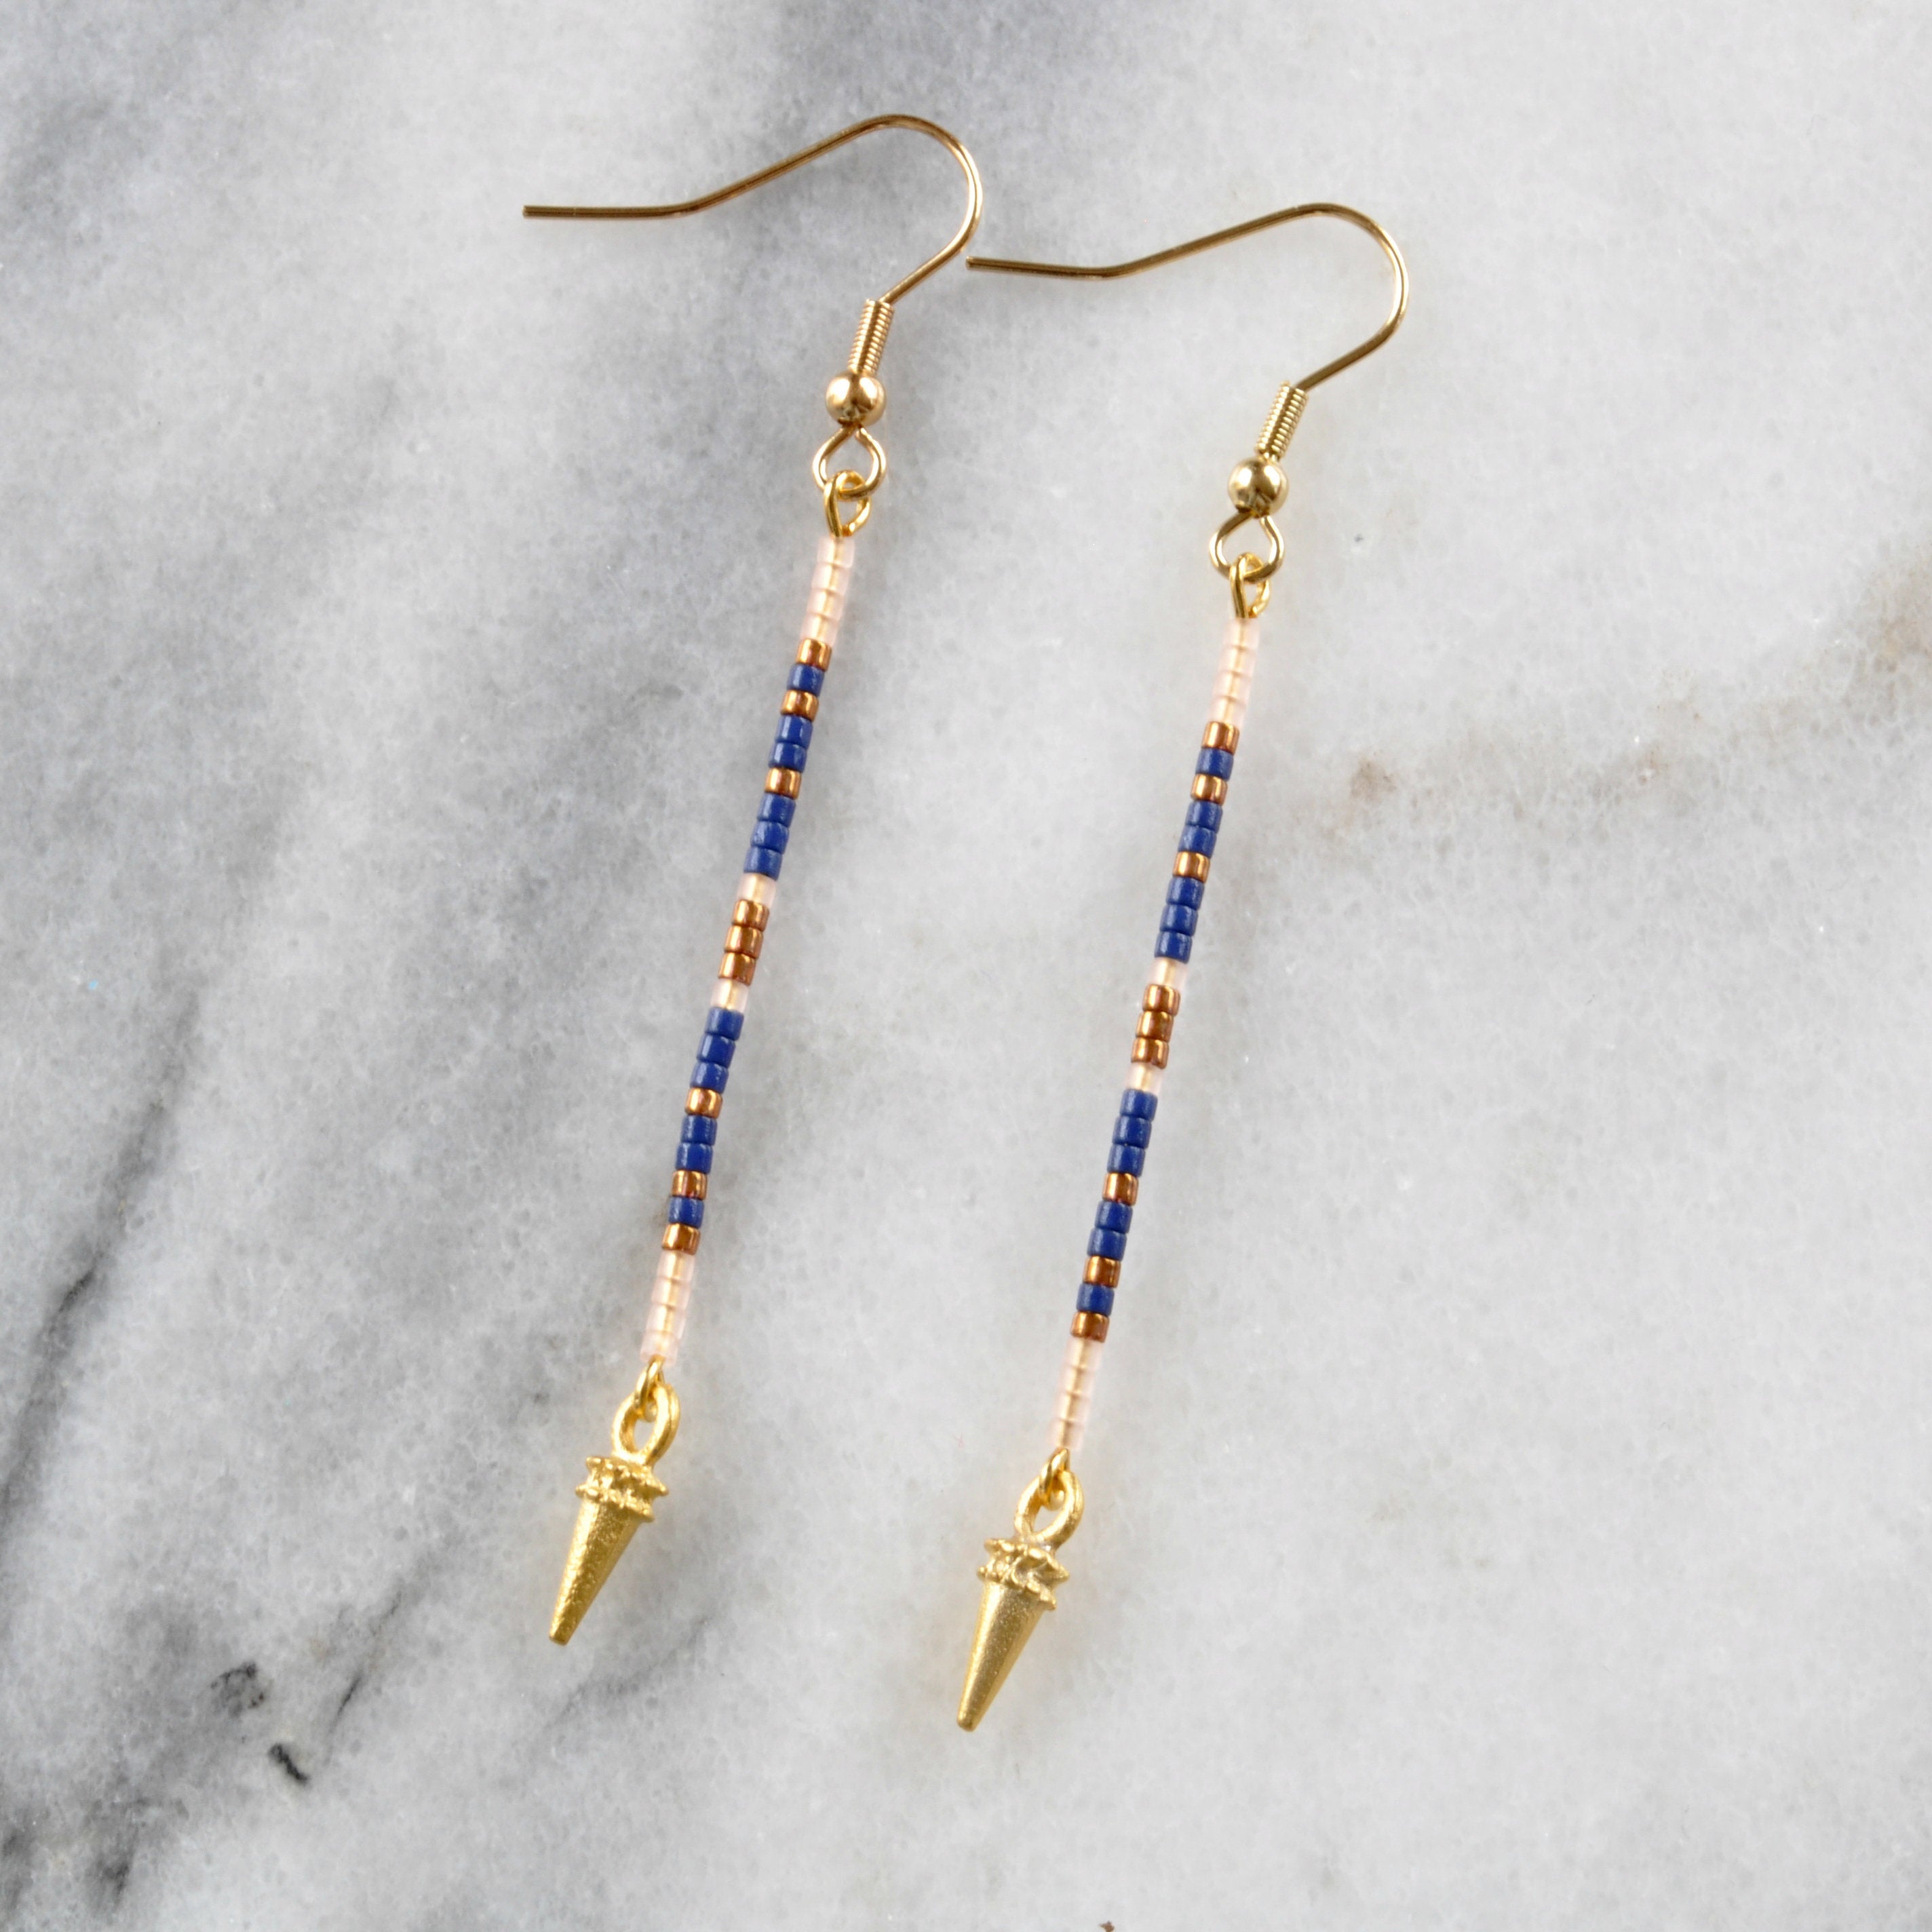 Long beaded earrings from Libby & Smee with a gold earwire and beaded pattern in Navy in navy, blush and bronze beads